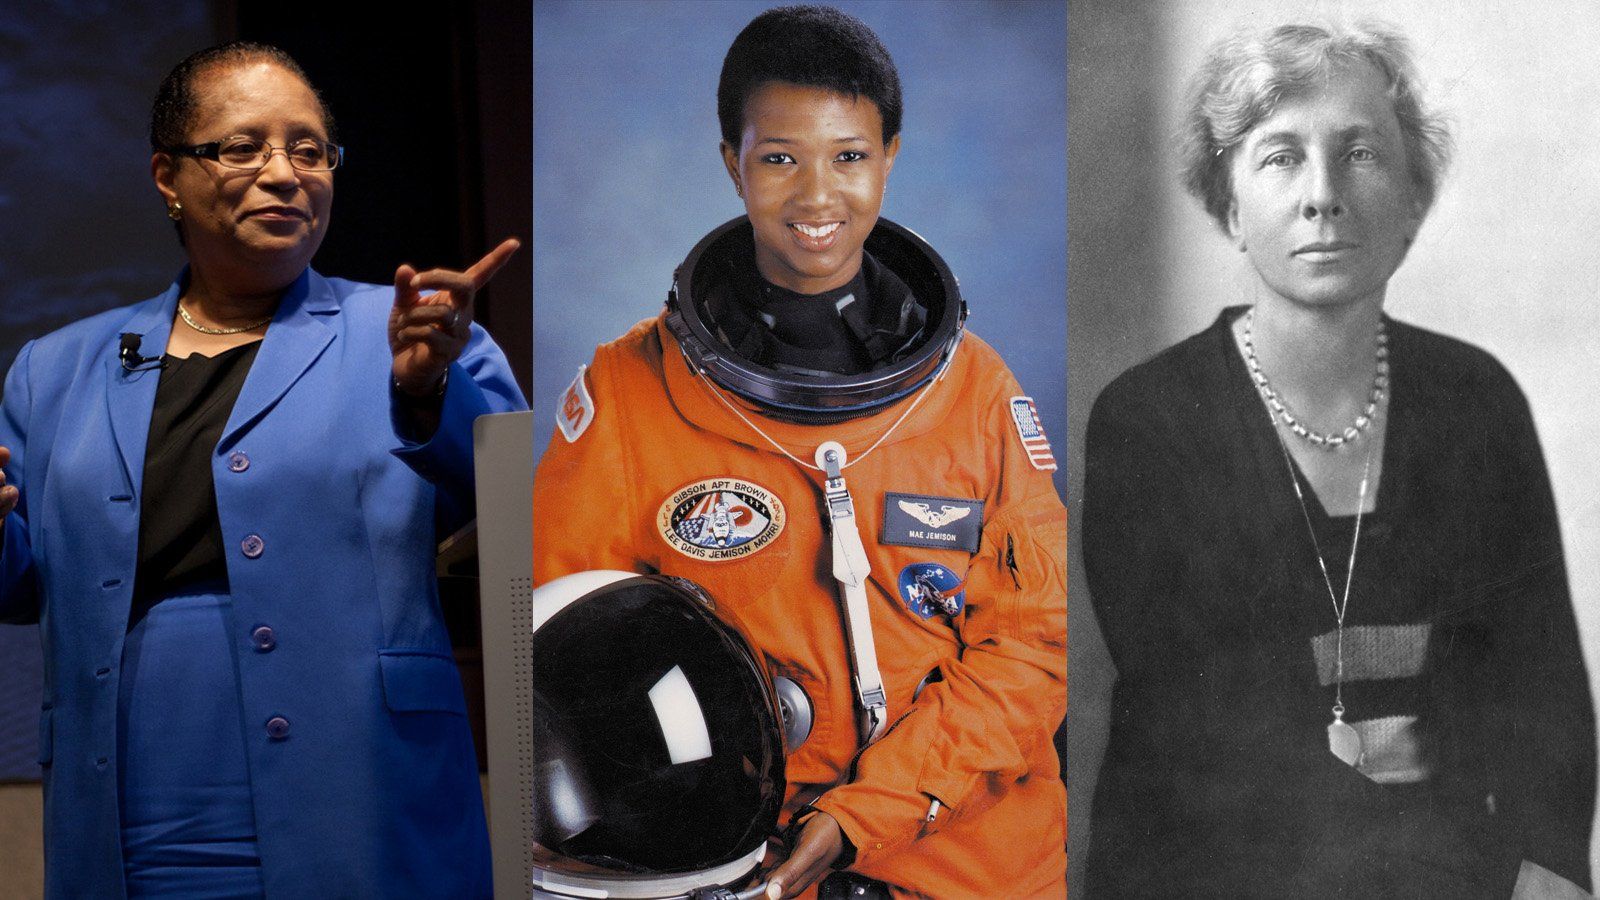 These 3 women tore through barriers in STEM